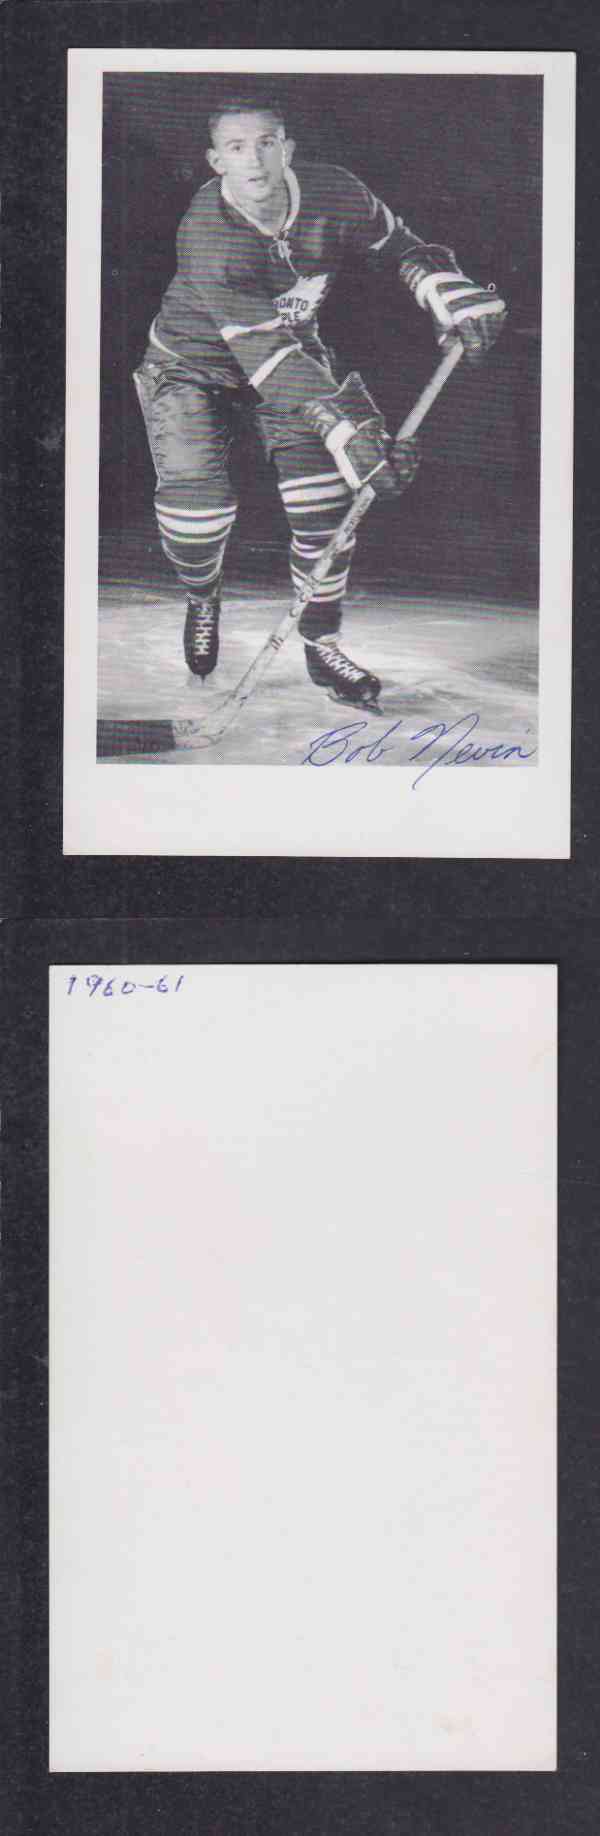 1960 'S TORONTO MAPLE LEAFS B.NEVIN  AUTOGRAPHED POST CARD photo